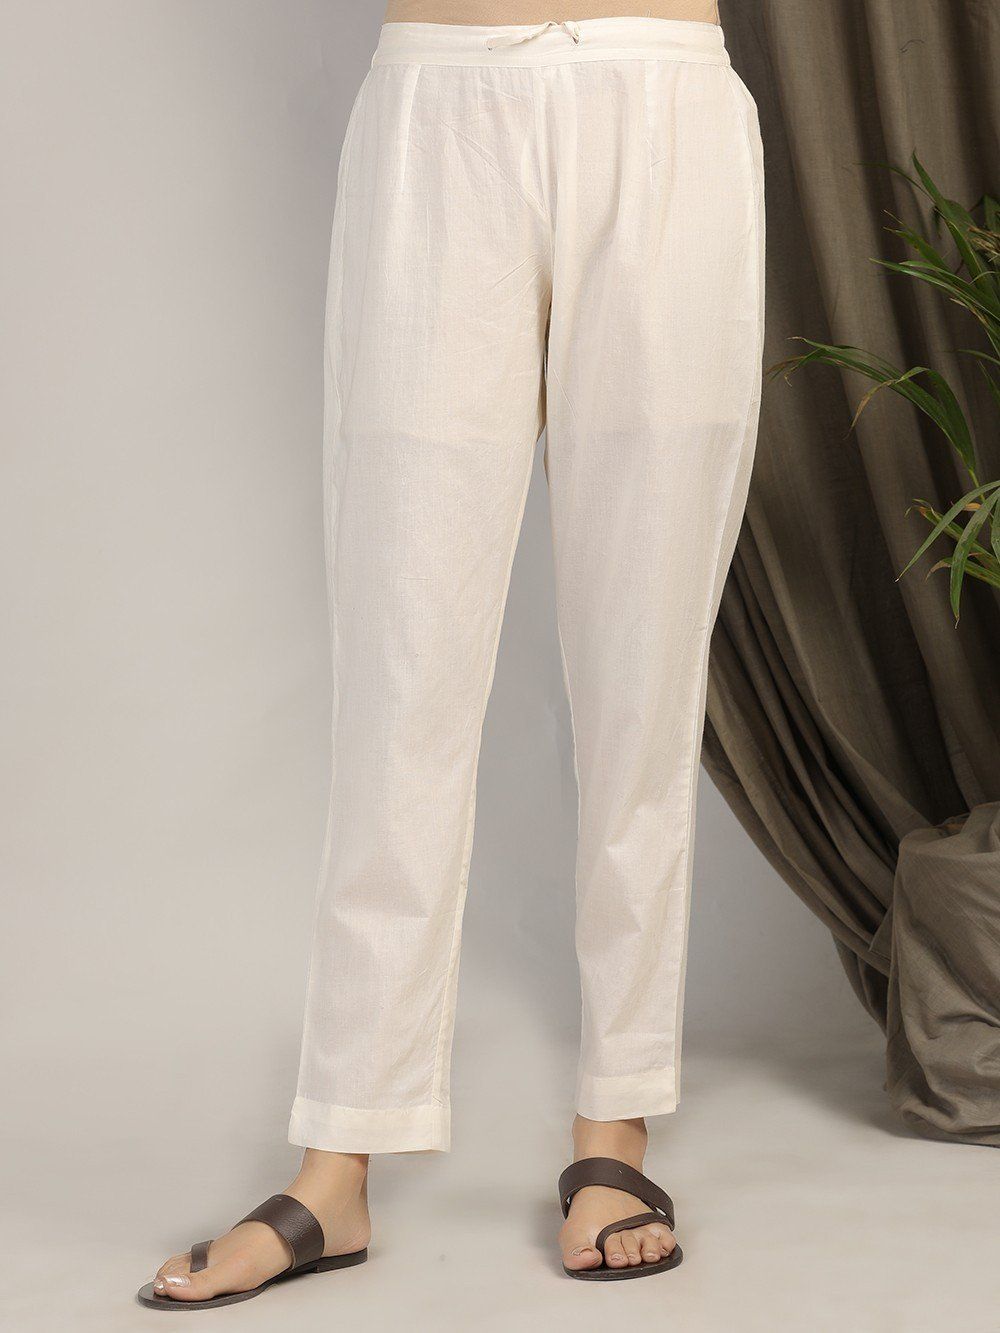 Discover more than 82 off white pants super hot